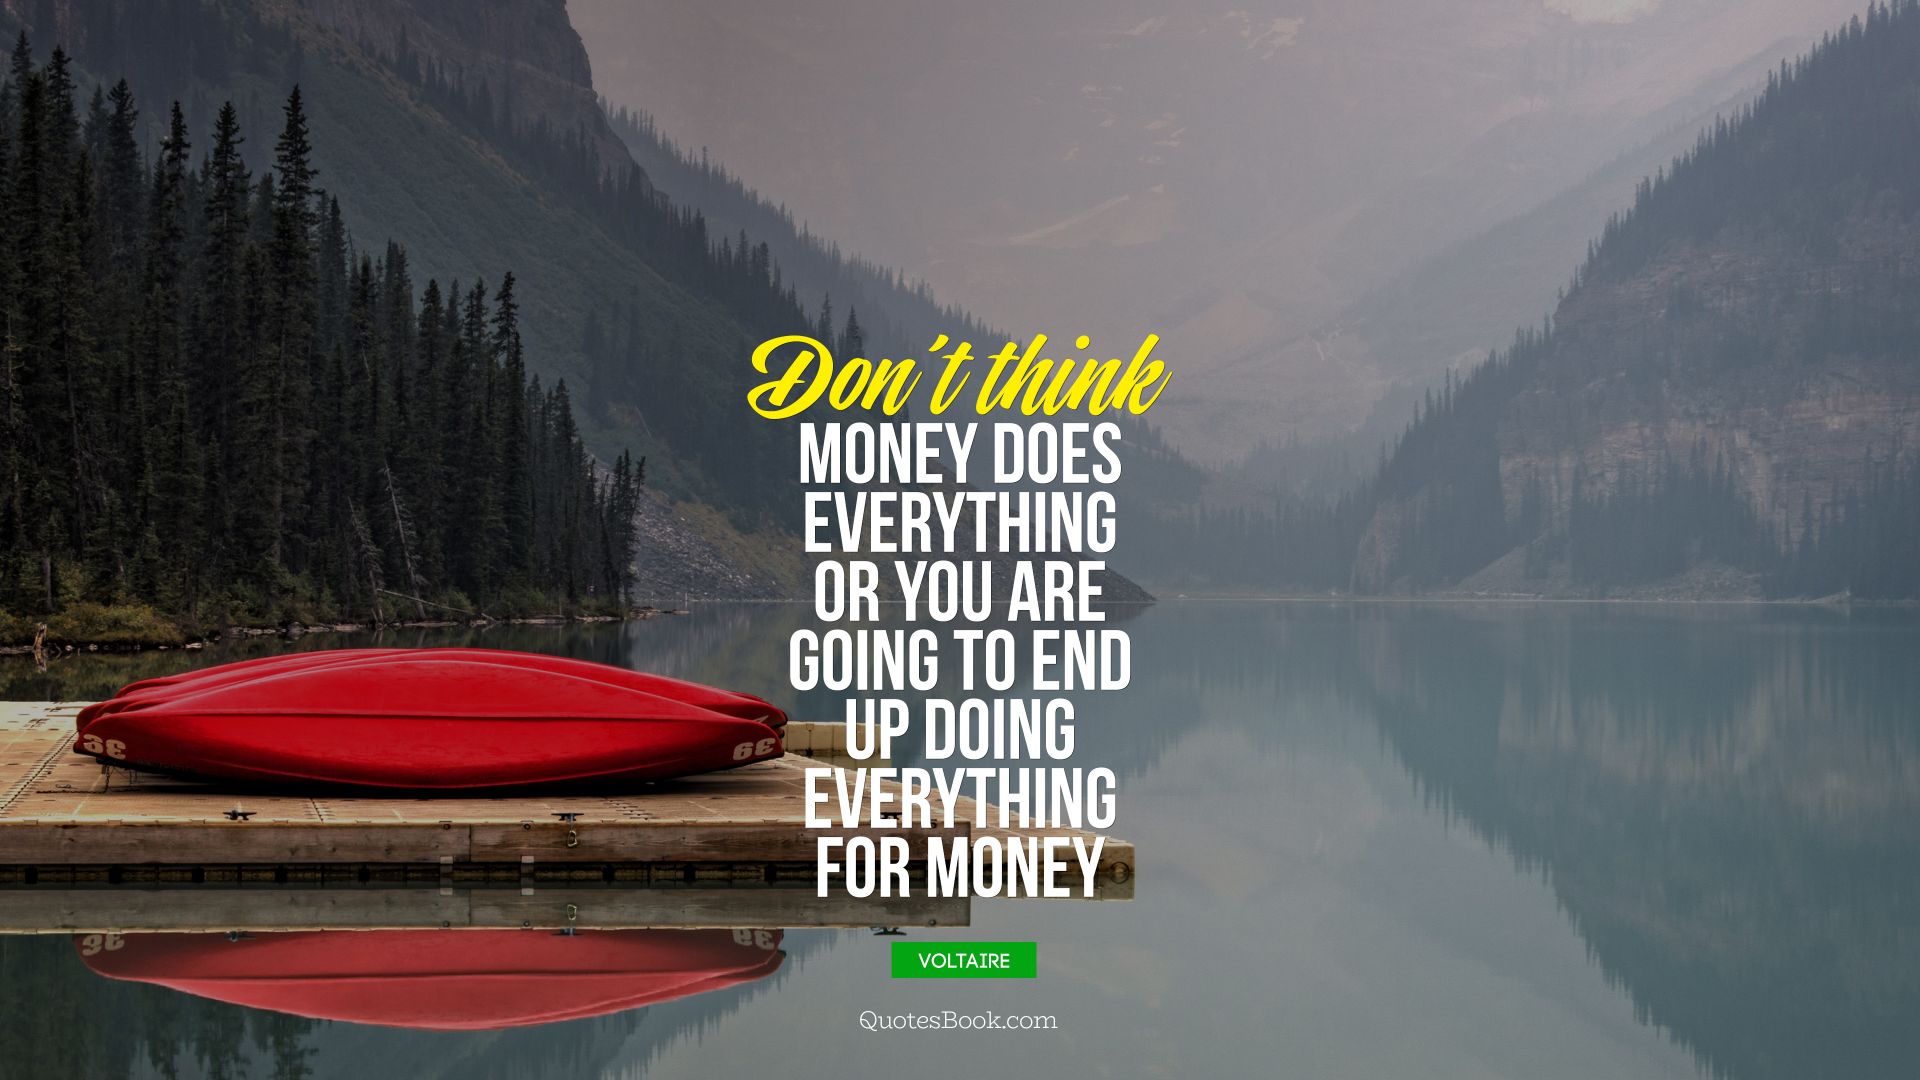 Don’t think money does everything or you are going to end up doing everything for money. - Quote by Voltaire